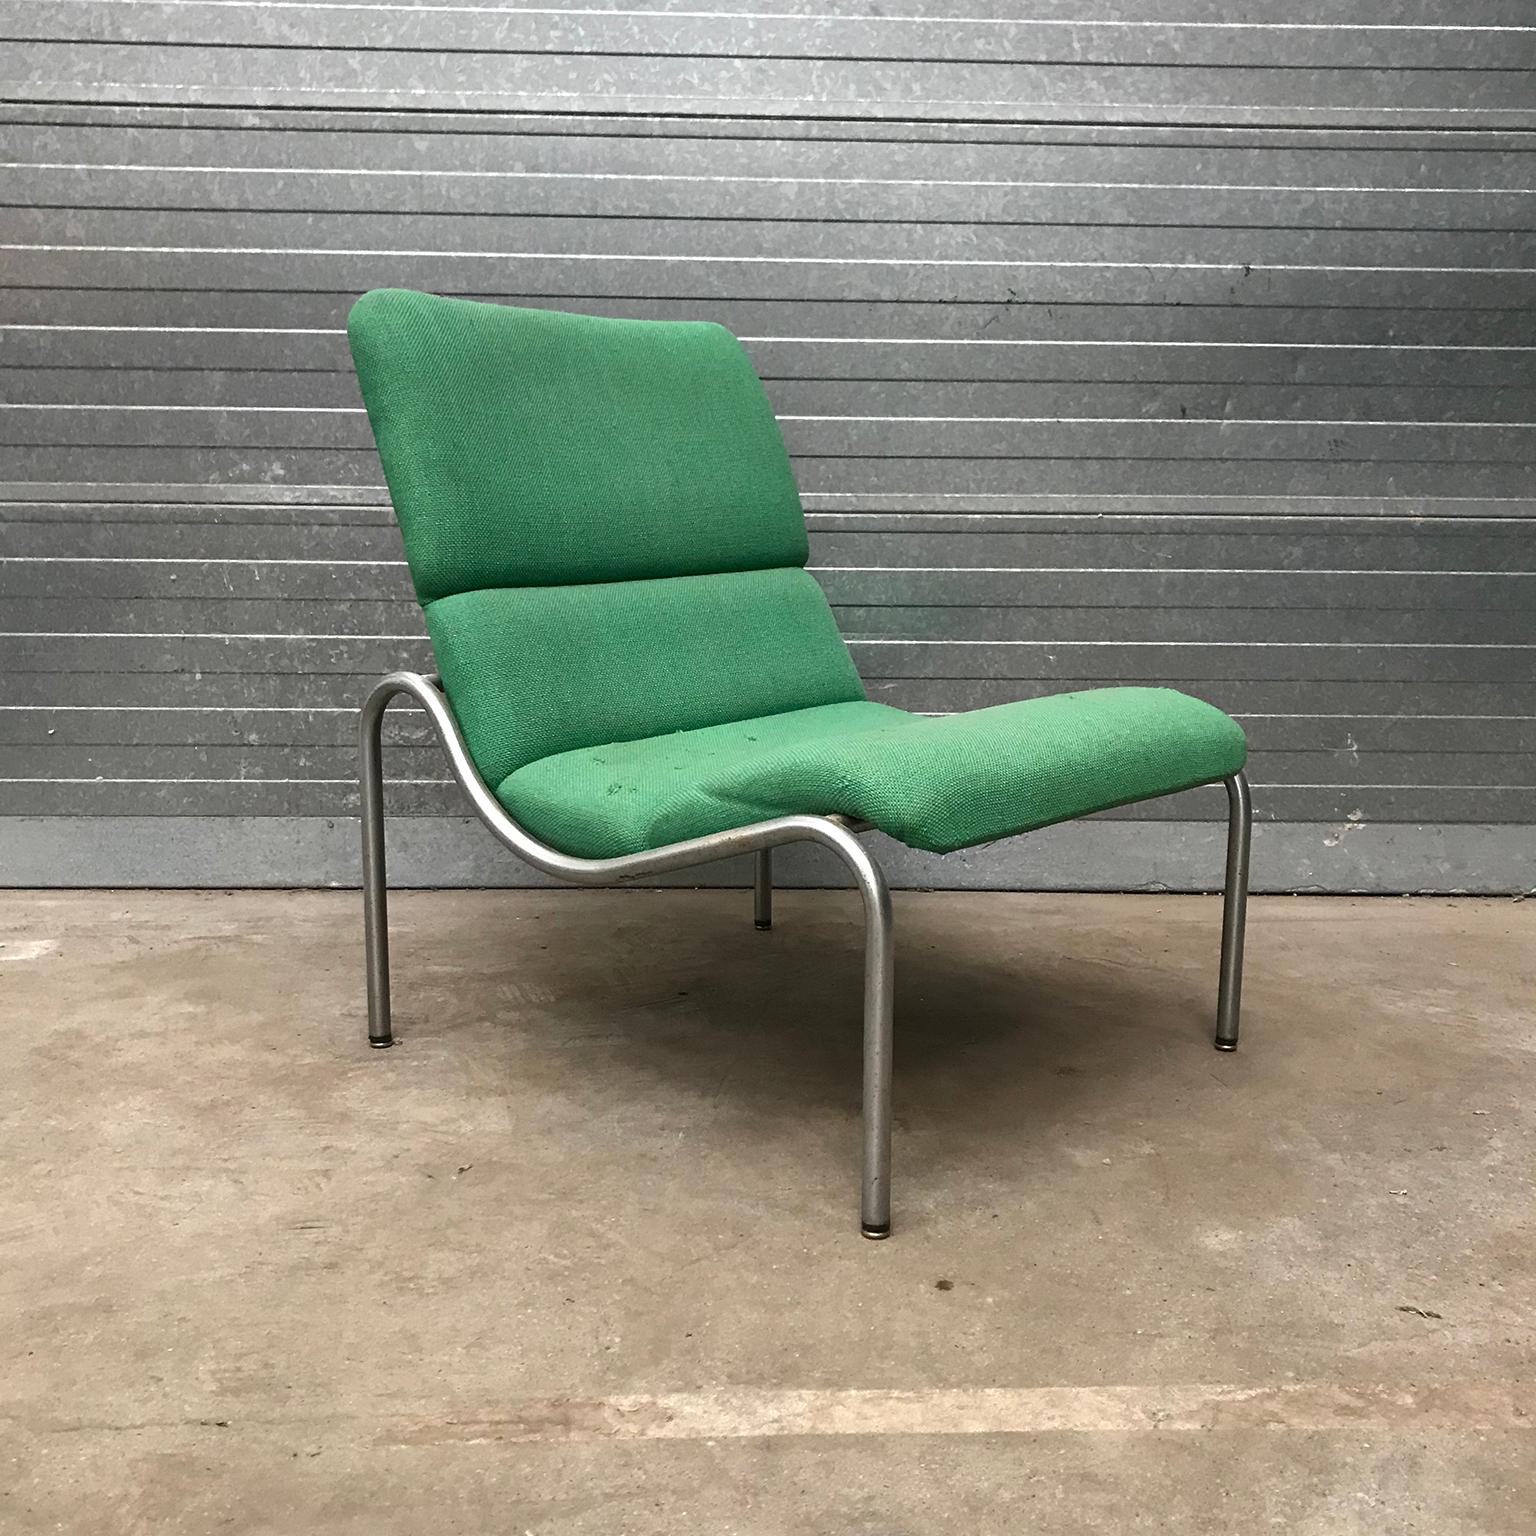 Kho Liang Ie easy chair in green upholstery. Beautiful elegant design. The chair shows some traces of wear like some little damage to the upholstery of the seat (see pictures #17-#19) and some (rusty) spots on the base

Free shipping for